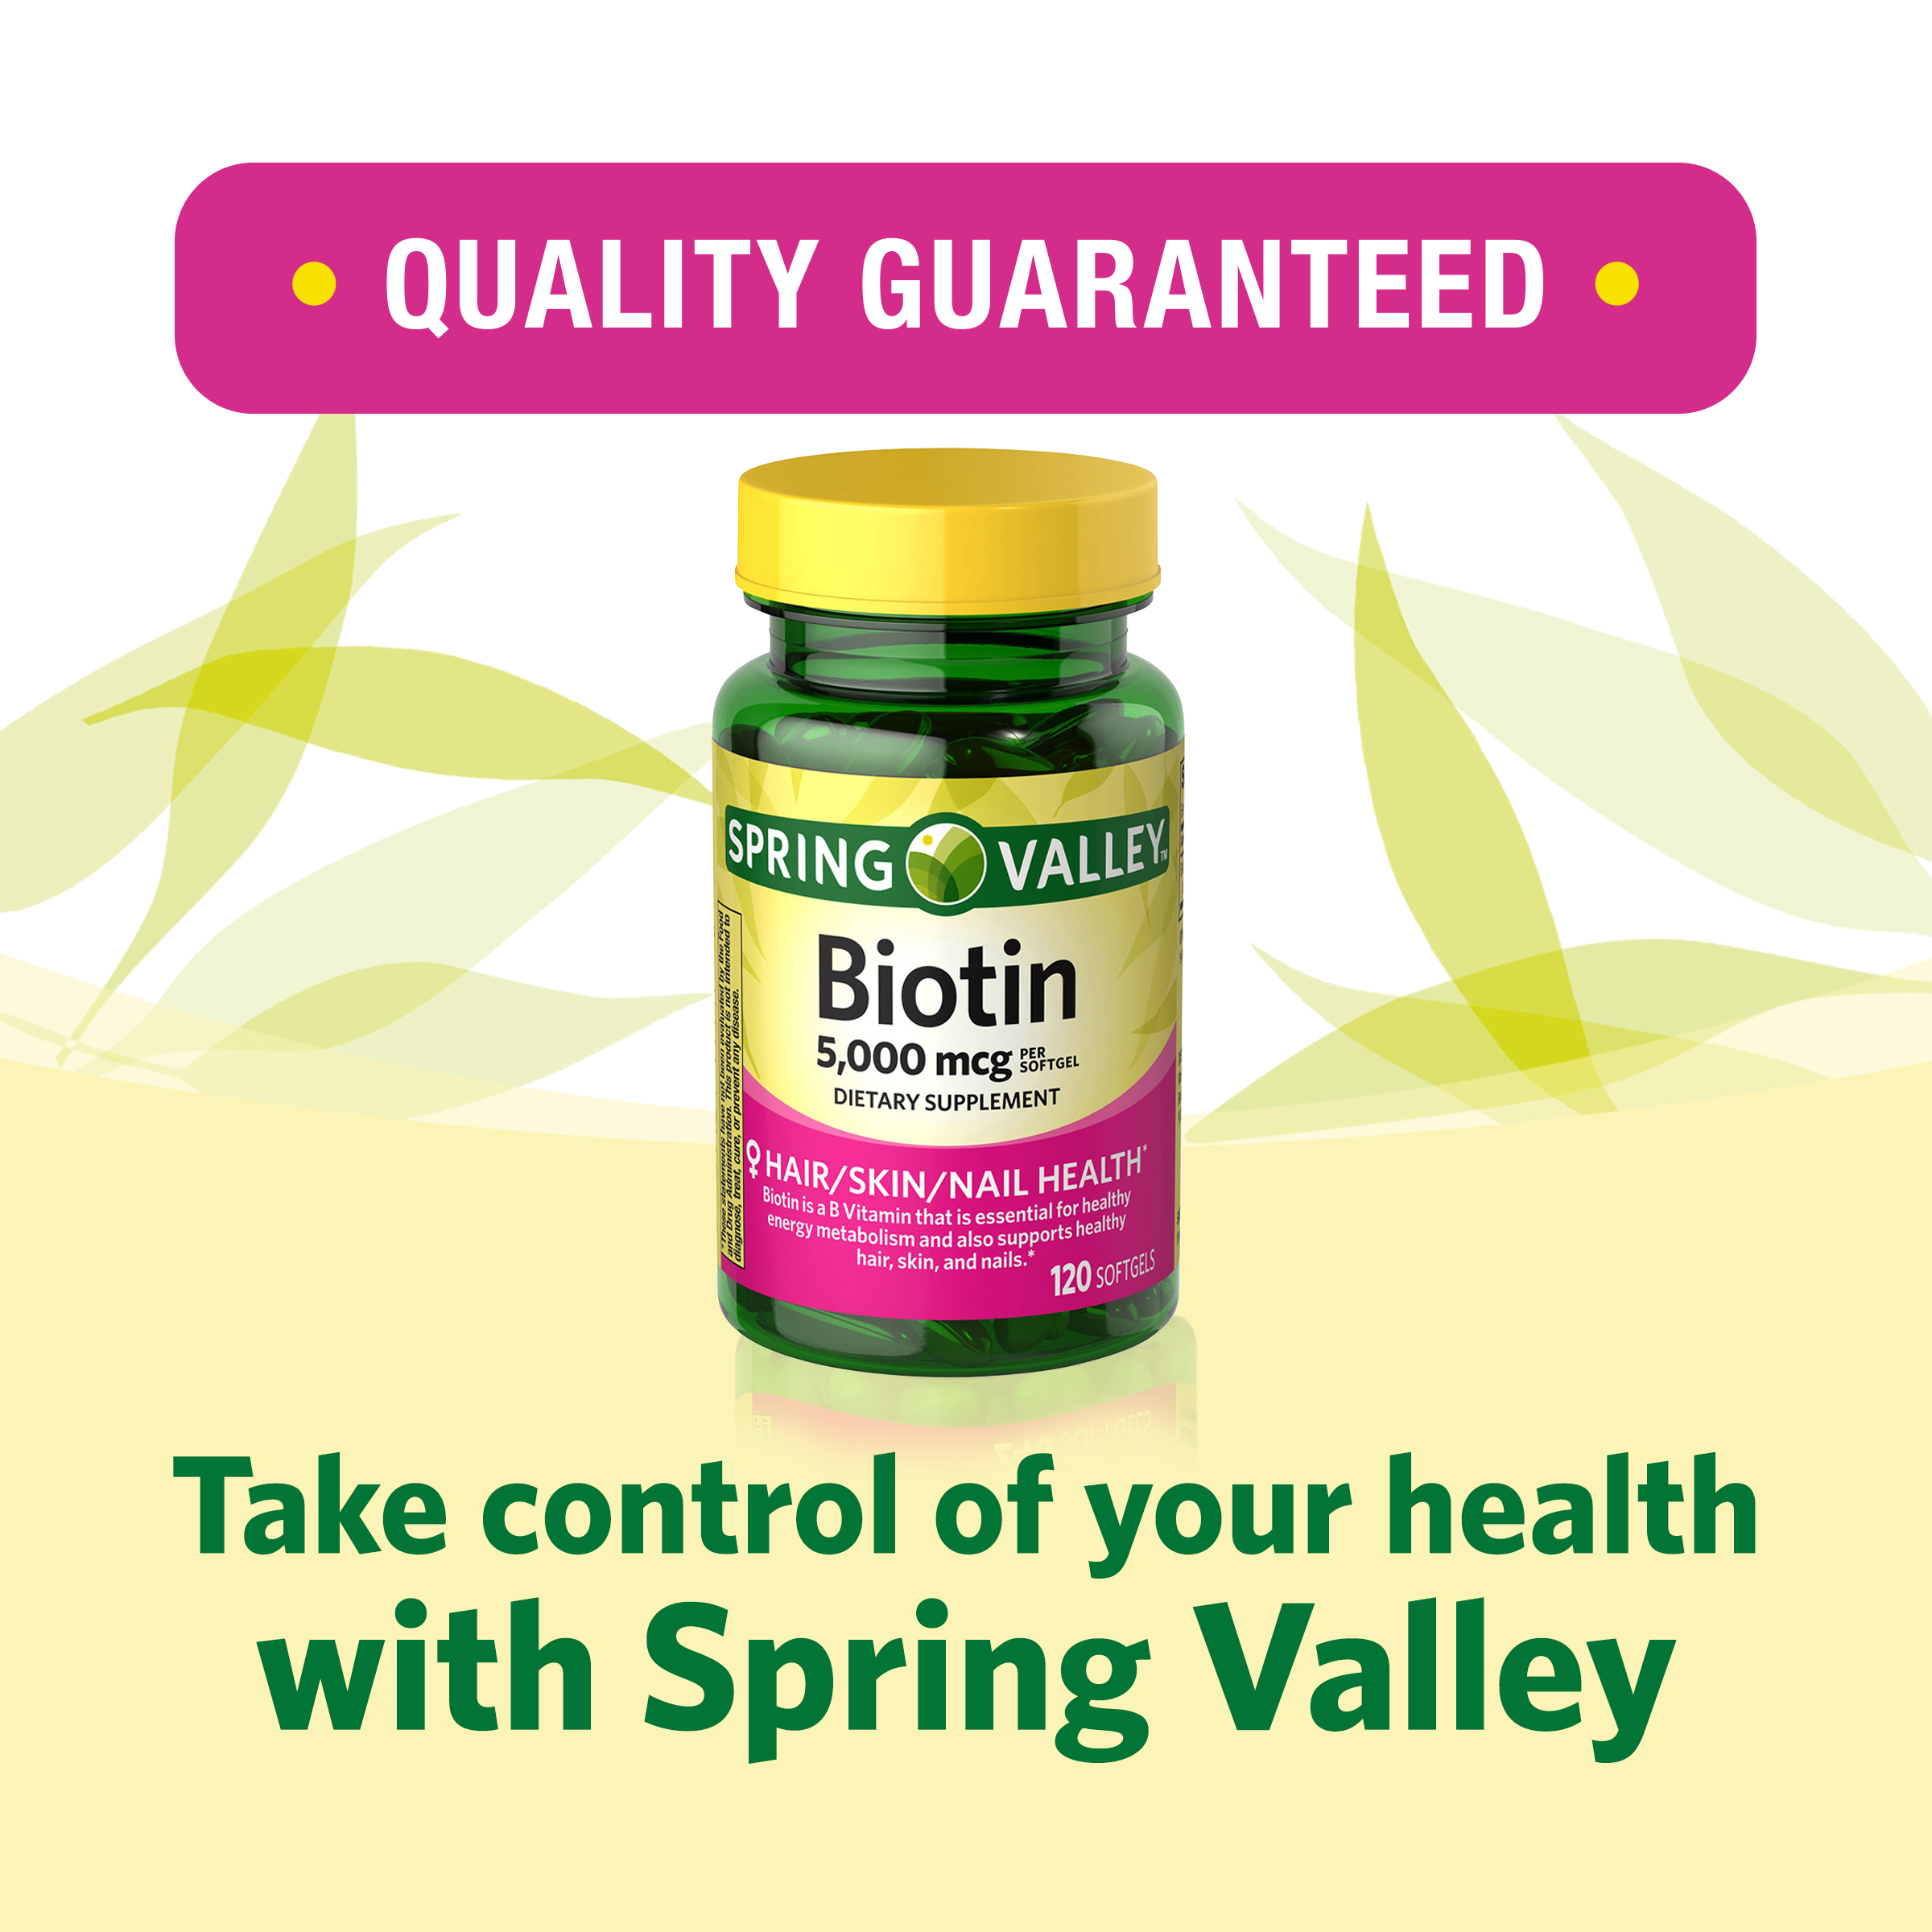 Spring Valley Biotin Hair/Skin/Nails Health Dietary Supplement Softgels, 5,000 mcg, 120 Count - image 4 of 16